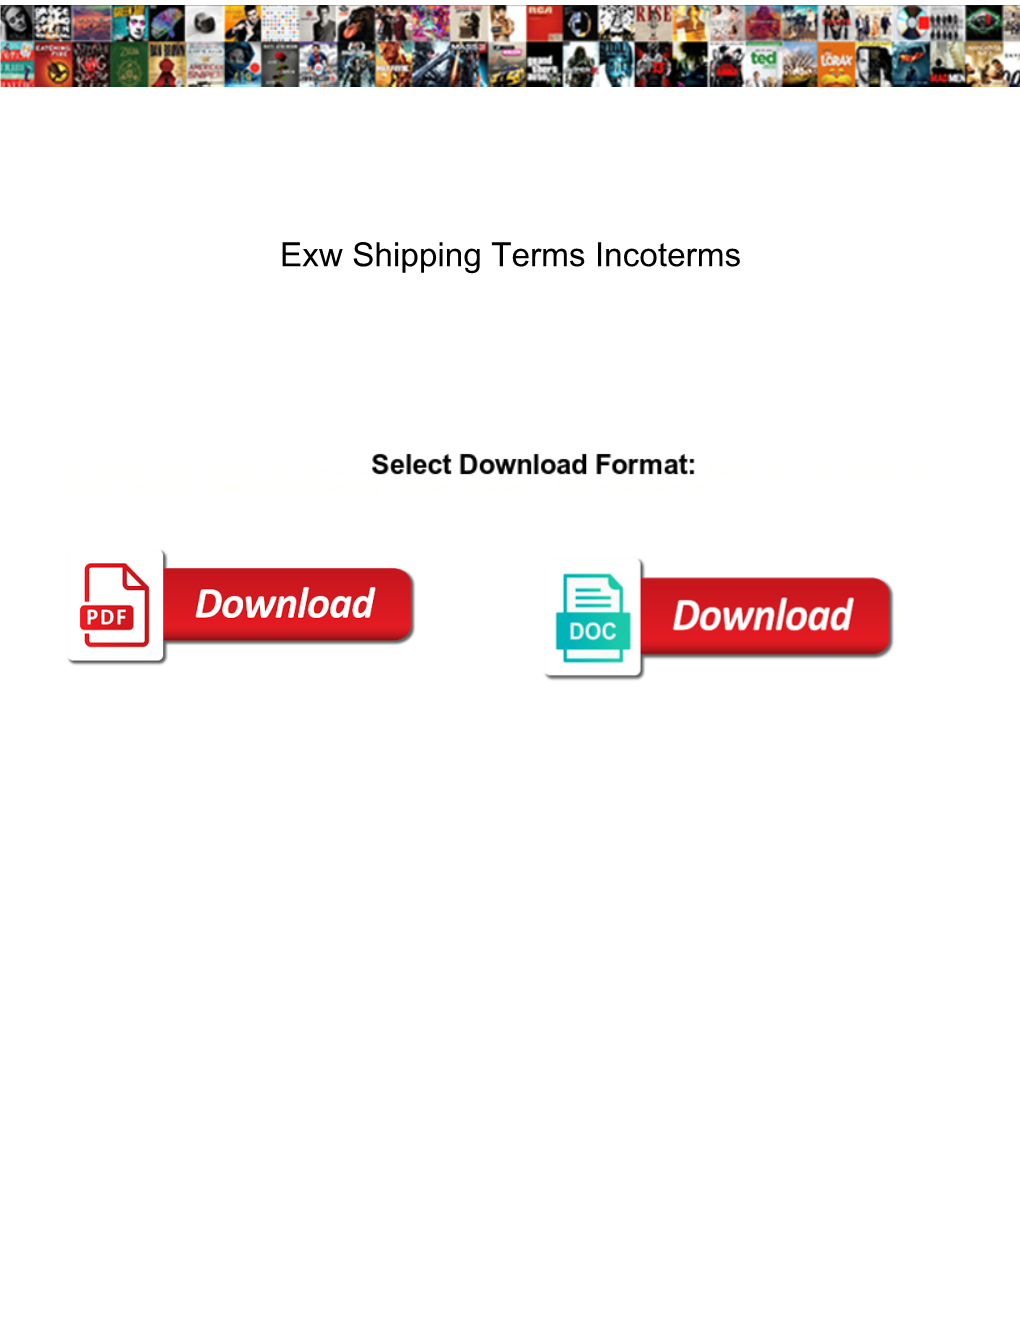 Exw Shipping Terms Incoterms